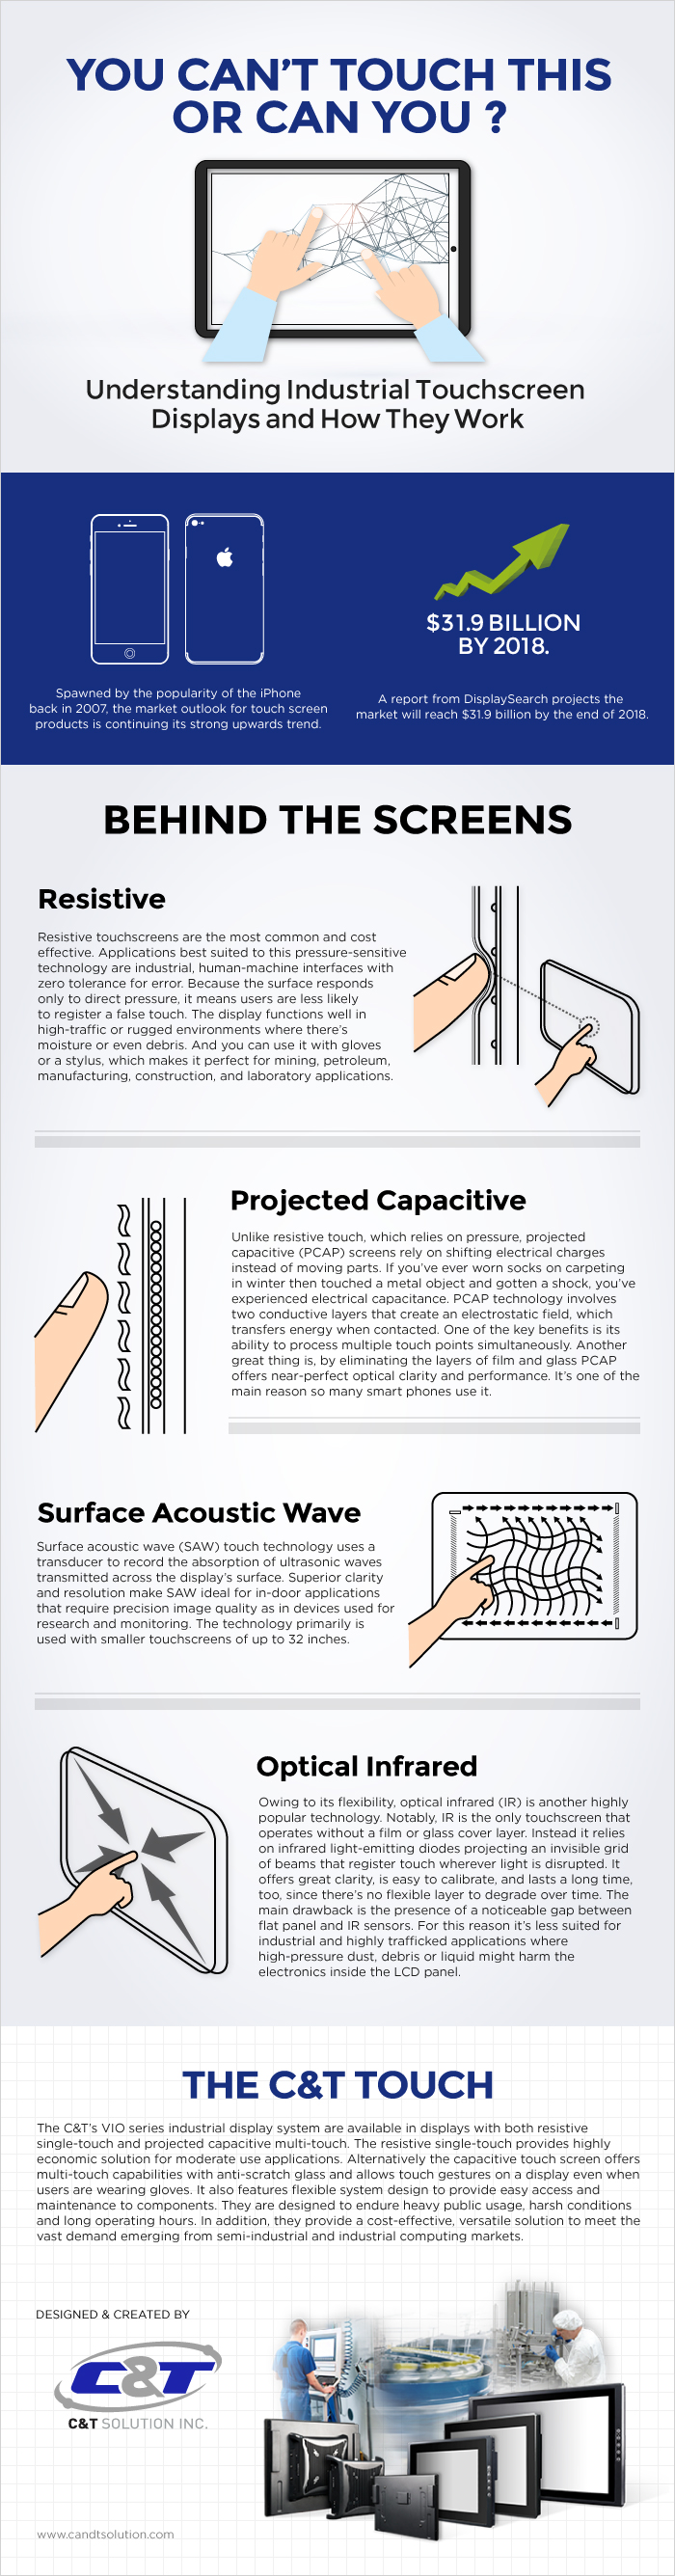 Infographic_Touchscreen-Technology_170904